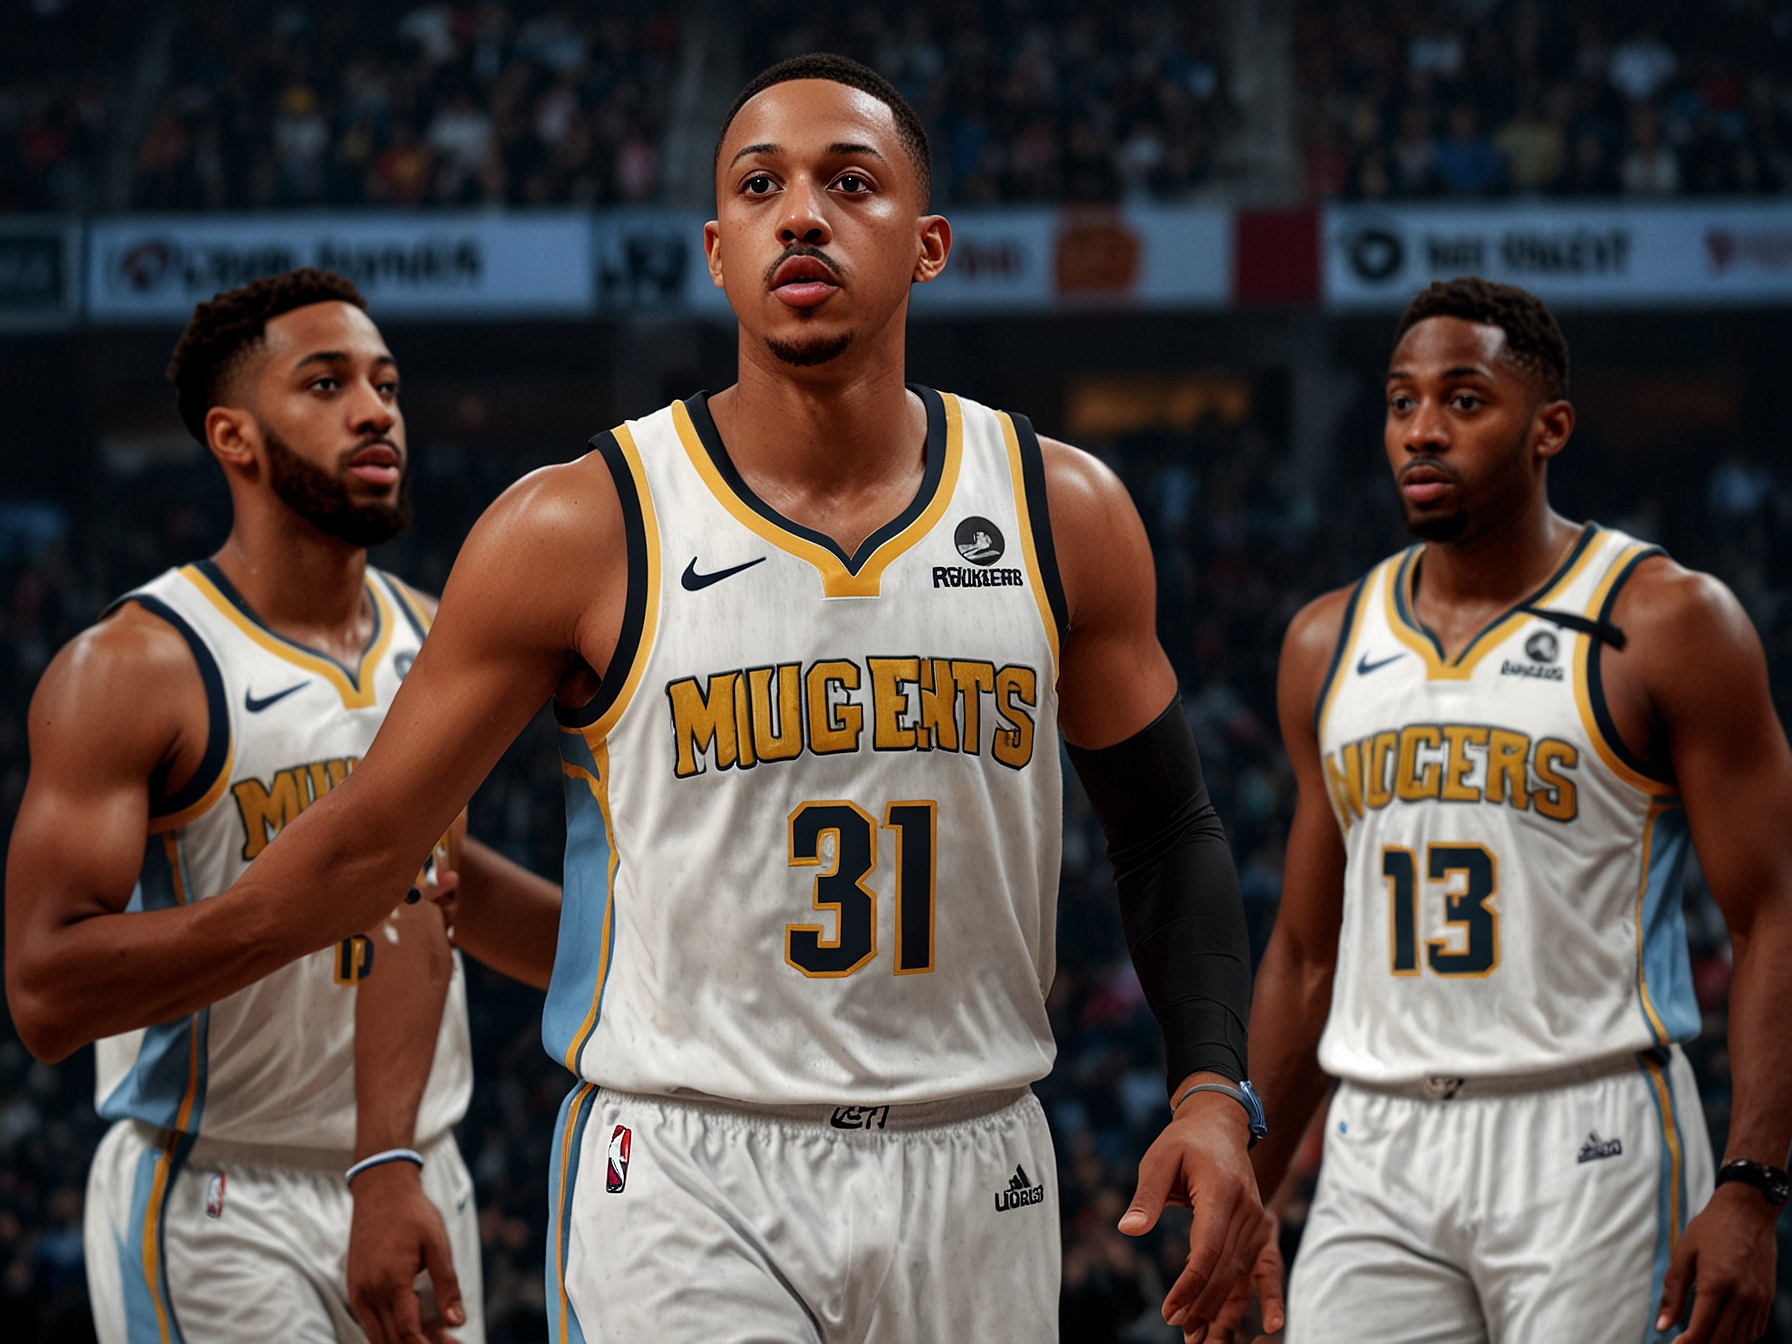 An illustration of CJ McCollum and the Denver Nuggets team, highlighting McCollum's unexpected endorsement and showcasing the potential new dynamics if George joins the Nuggets.